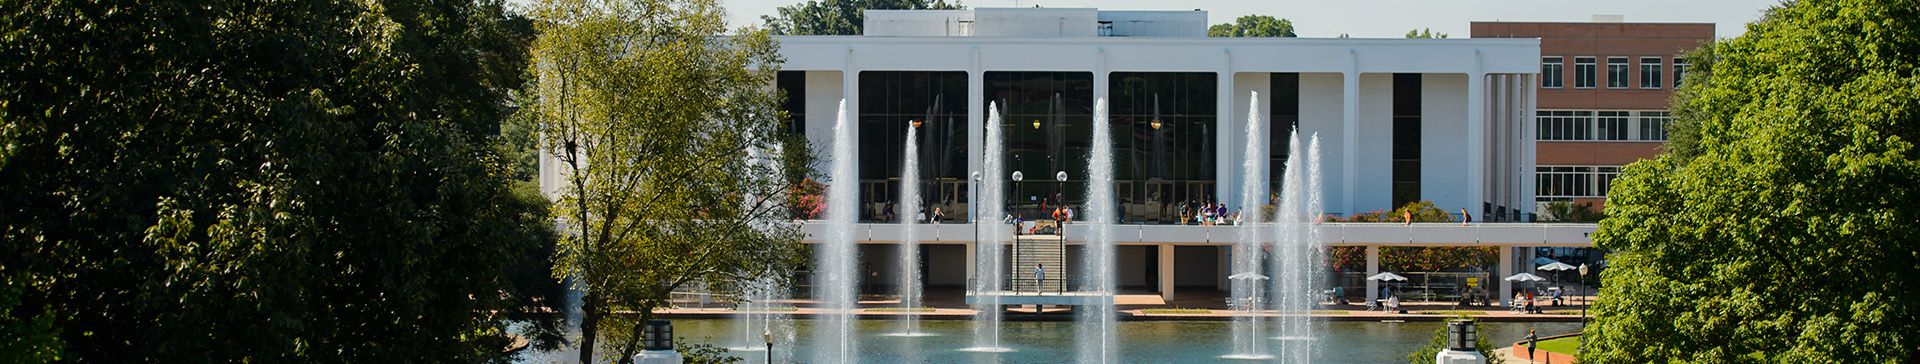 Reflection pond and library from the North Green.